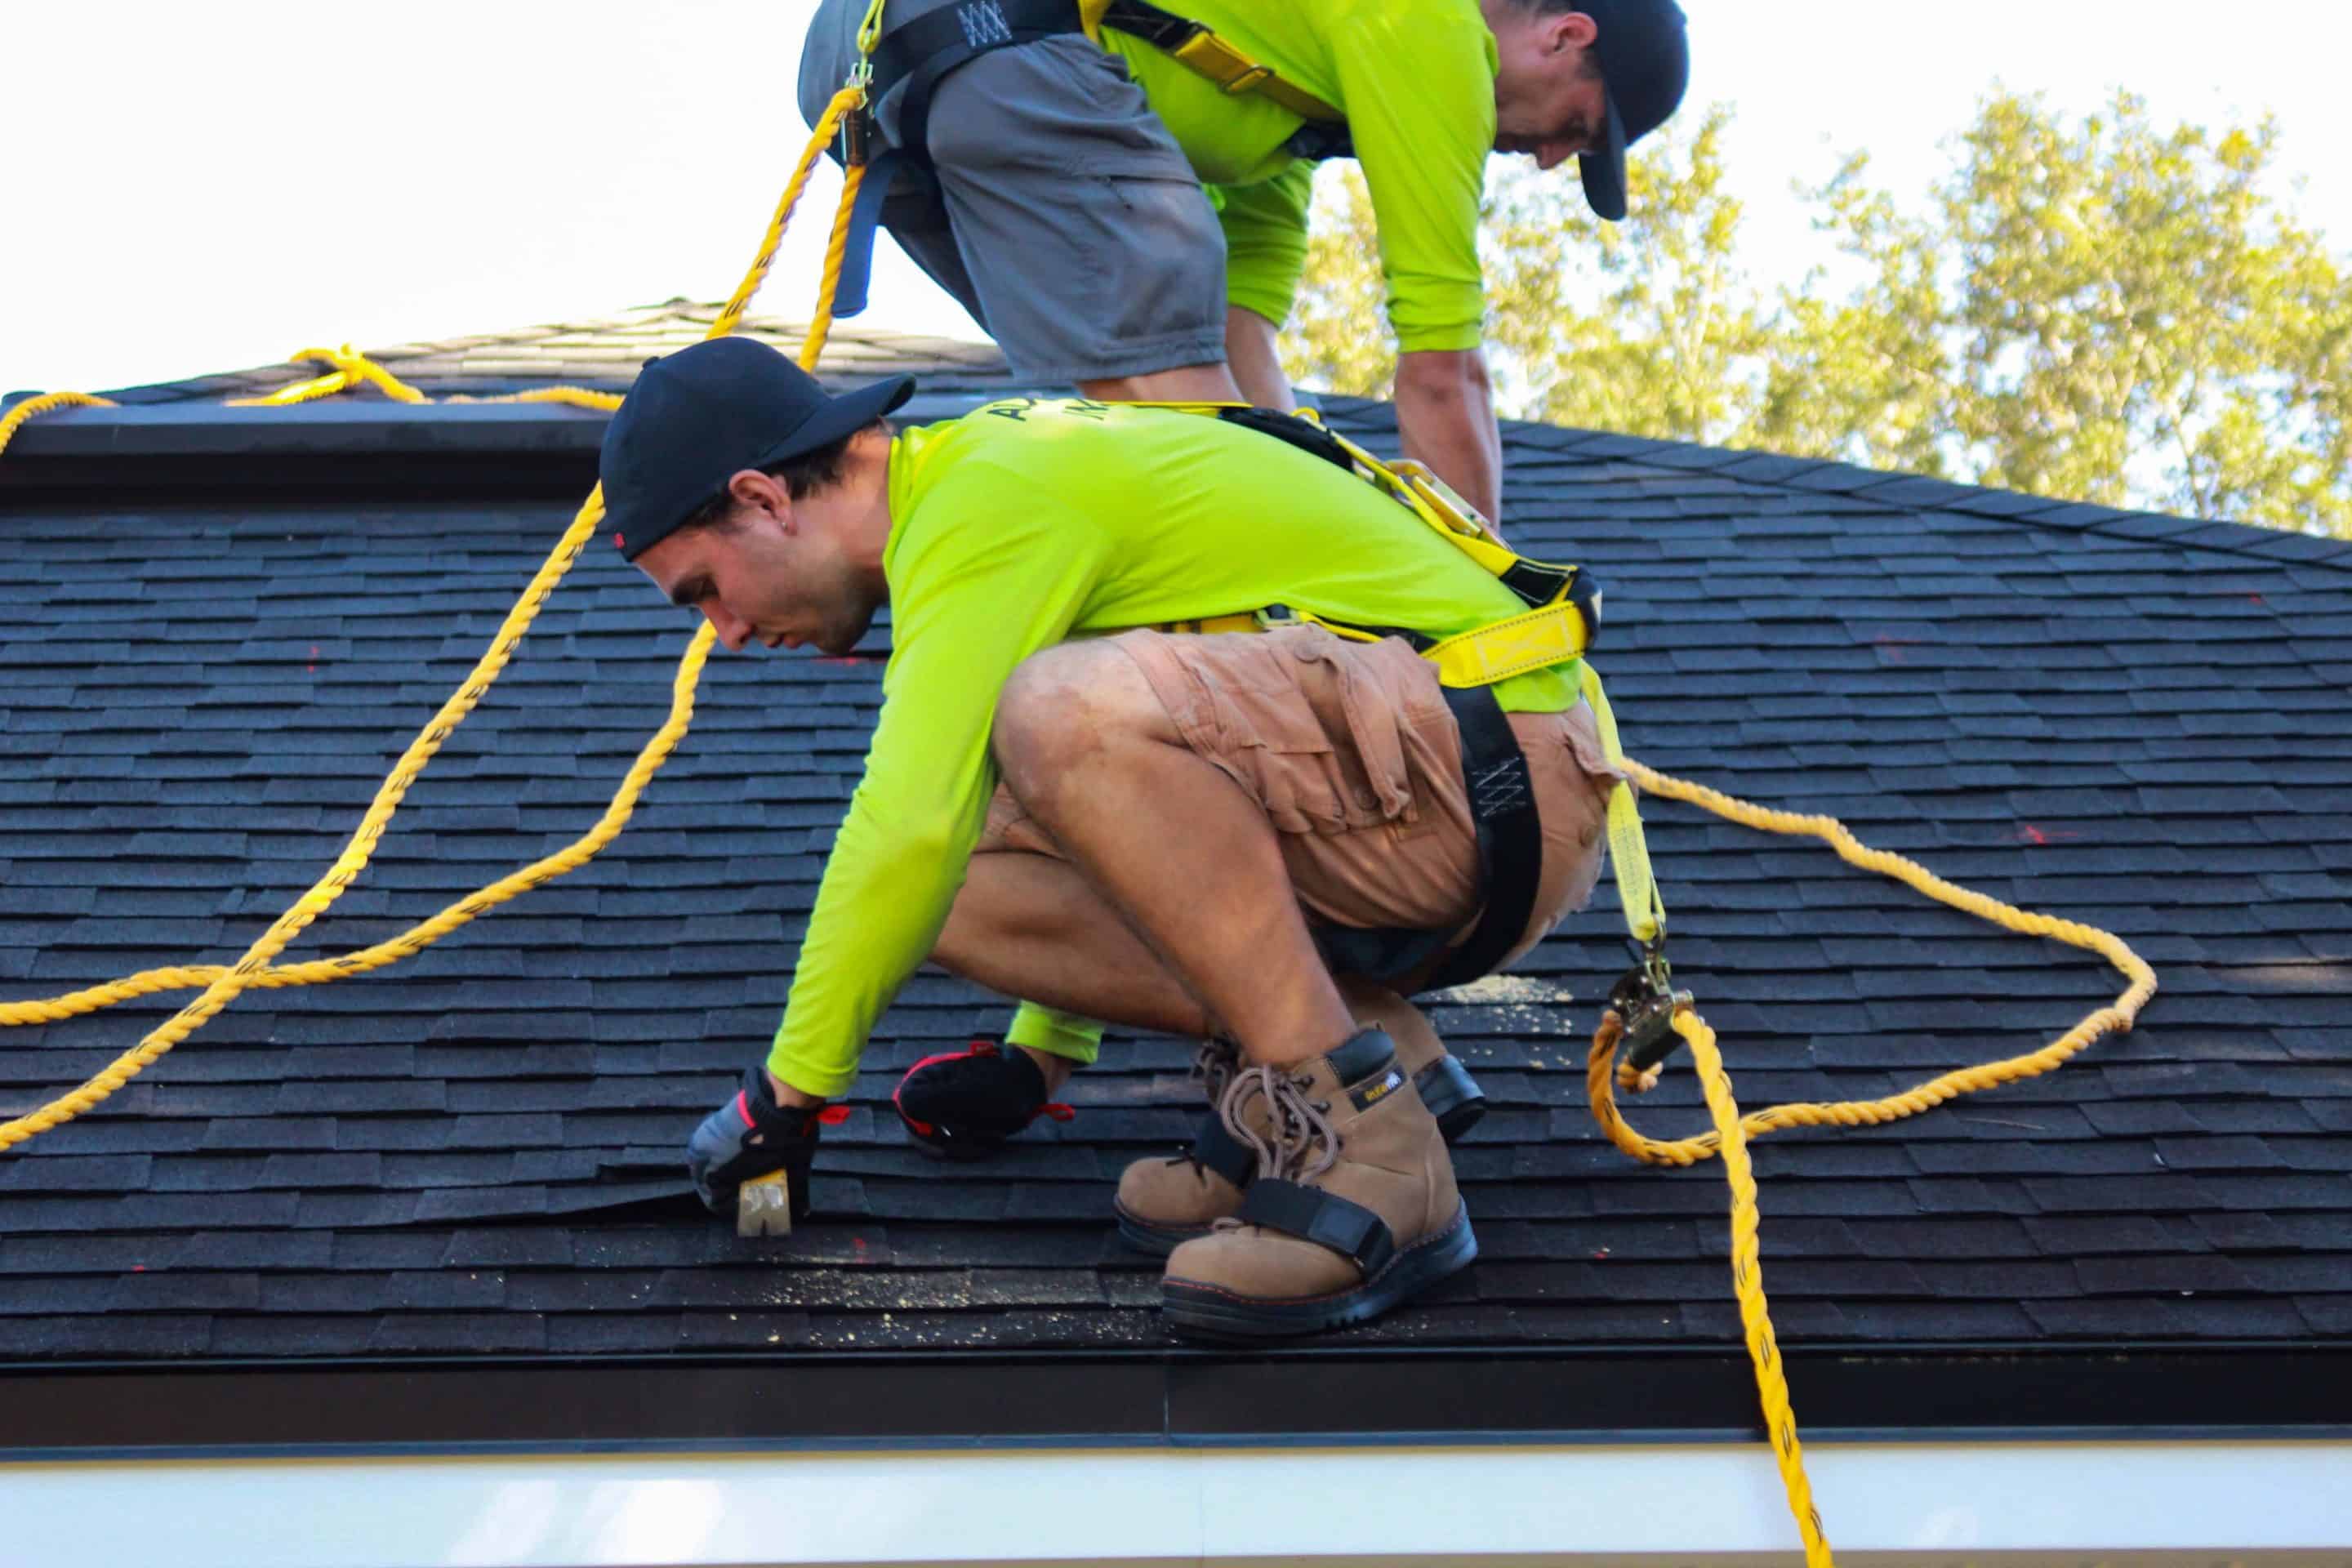 Roofing Business